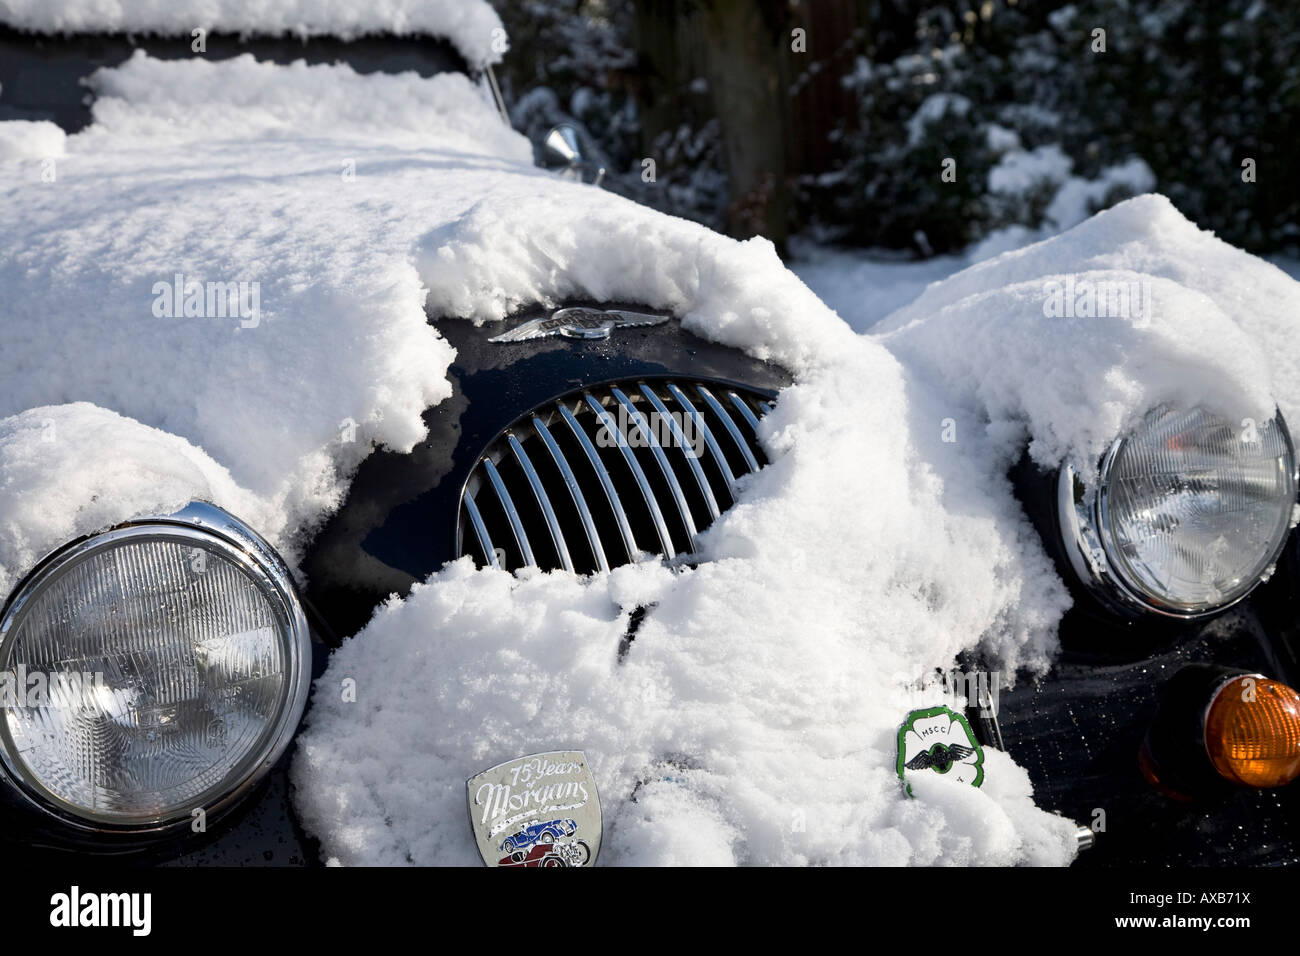 Radiator Grill of a Morgan Sports Car covered in snow Stock Photo